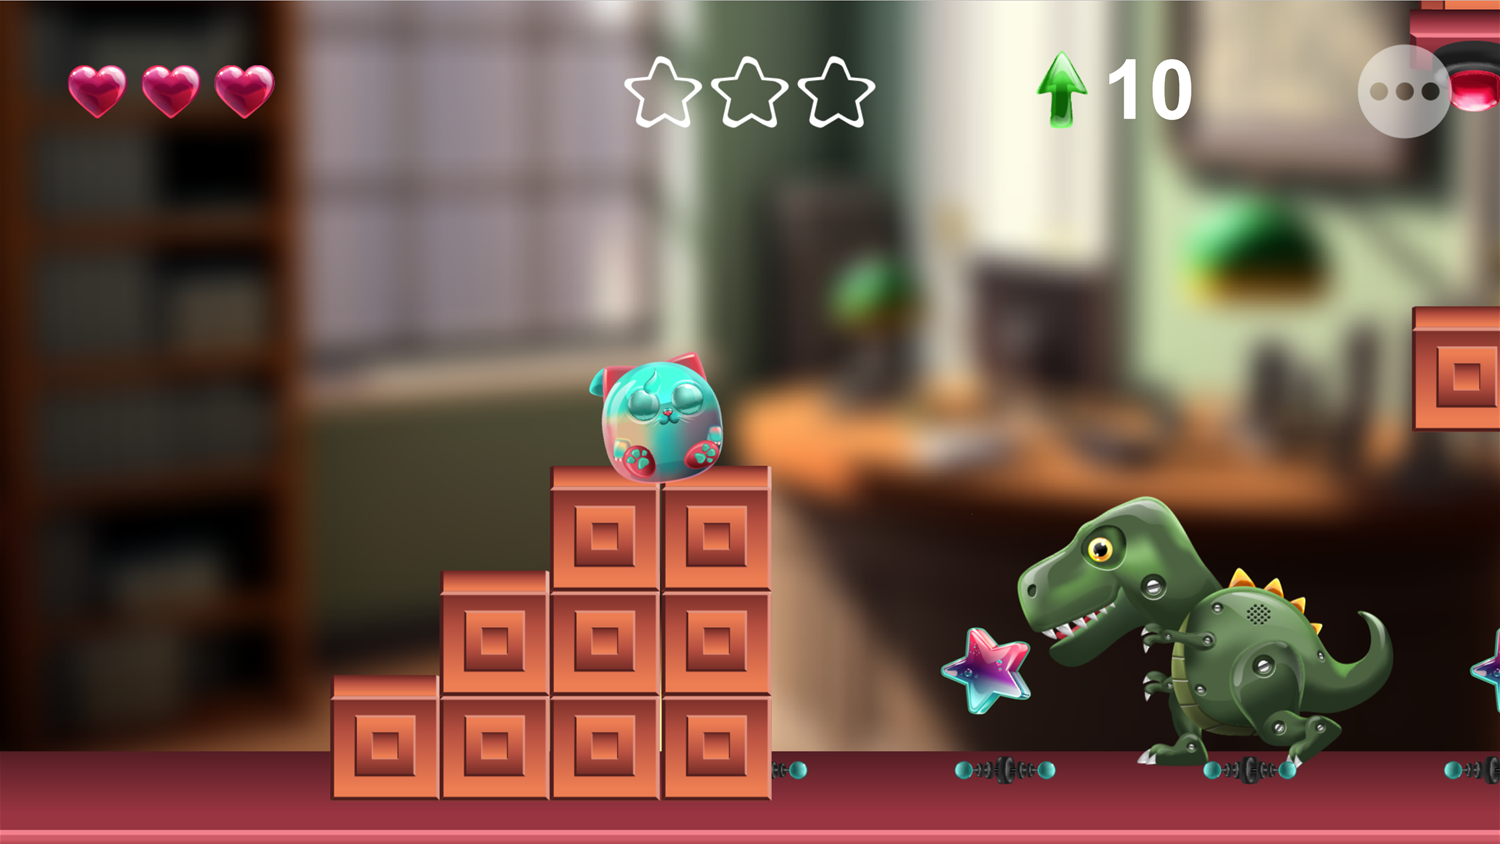 Fluffy Jelly Cat Game Level With a Dinosaur Screenshot.